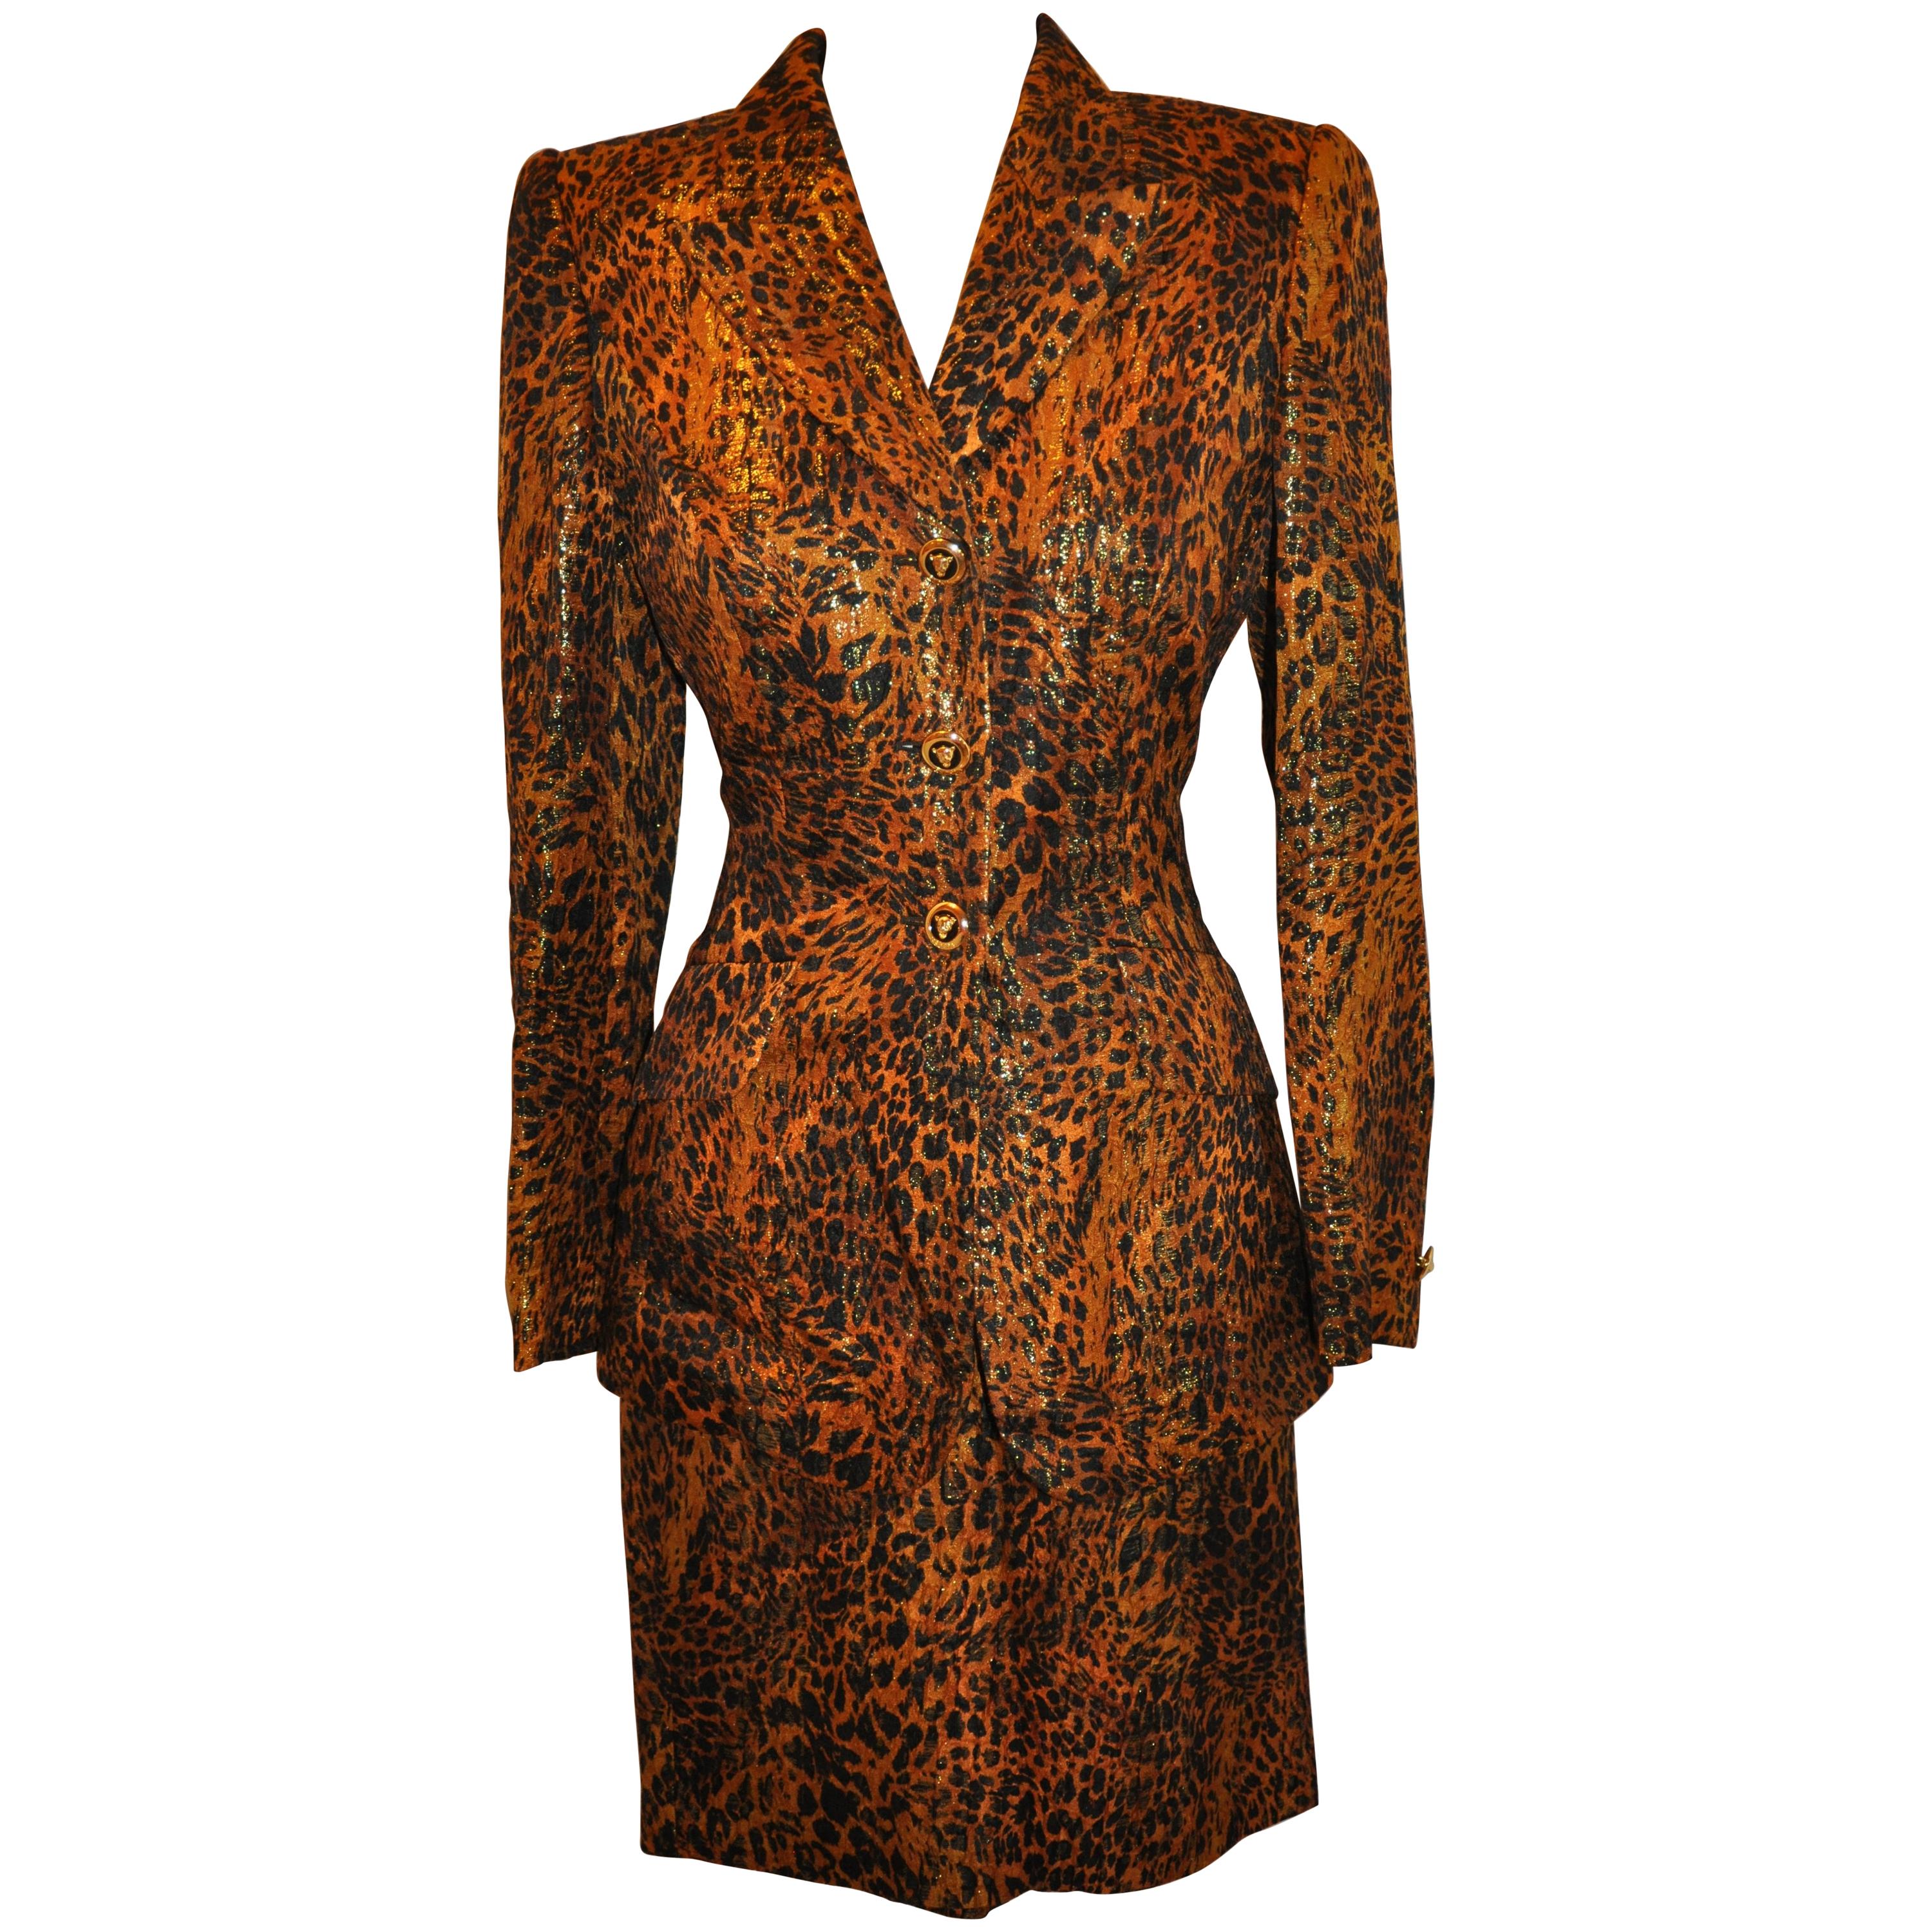 Escada Beautifully Elegant Leopard Print with Metallic Gold Lame Skirt Suit For Sale